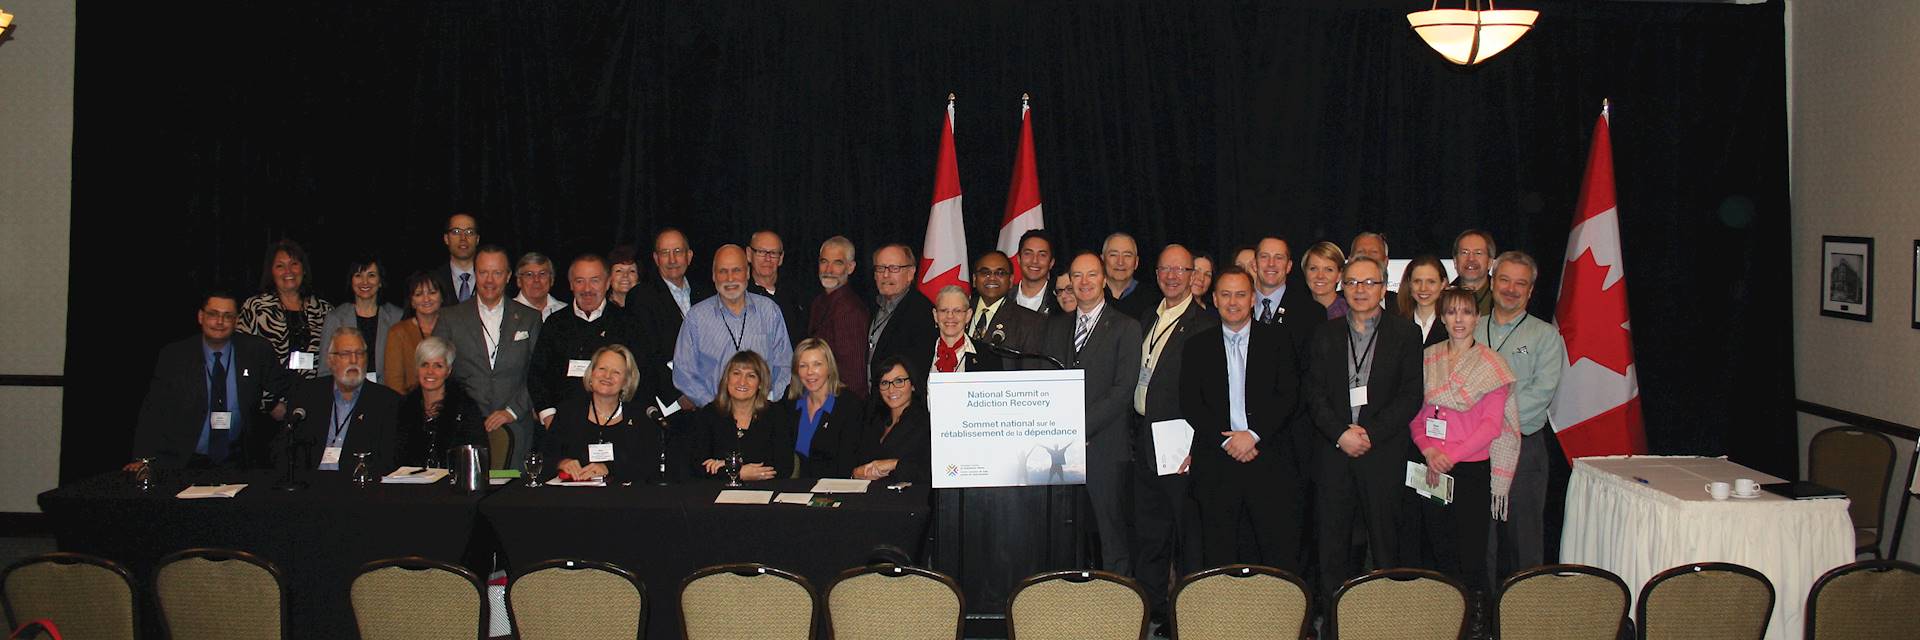 Canadian Summit on Addiction Recovery Group Photo 2015.jpg